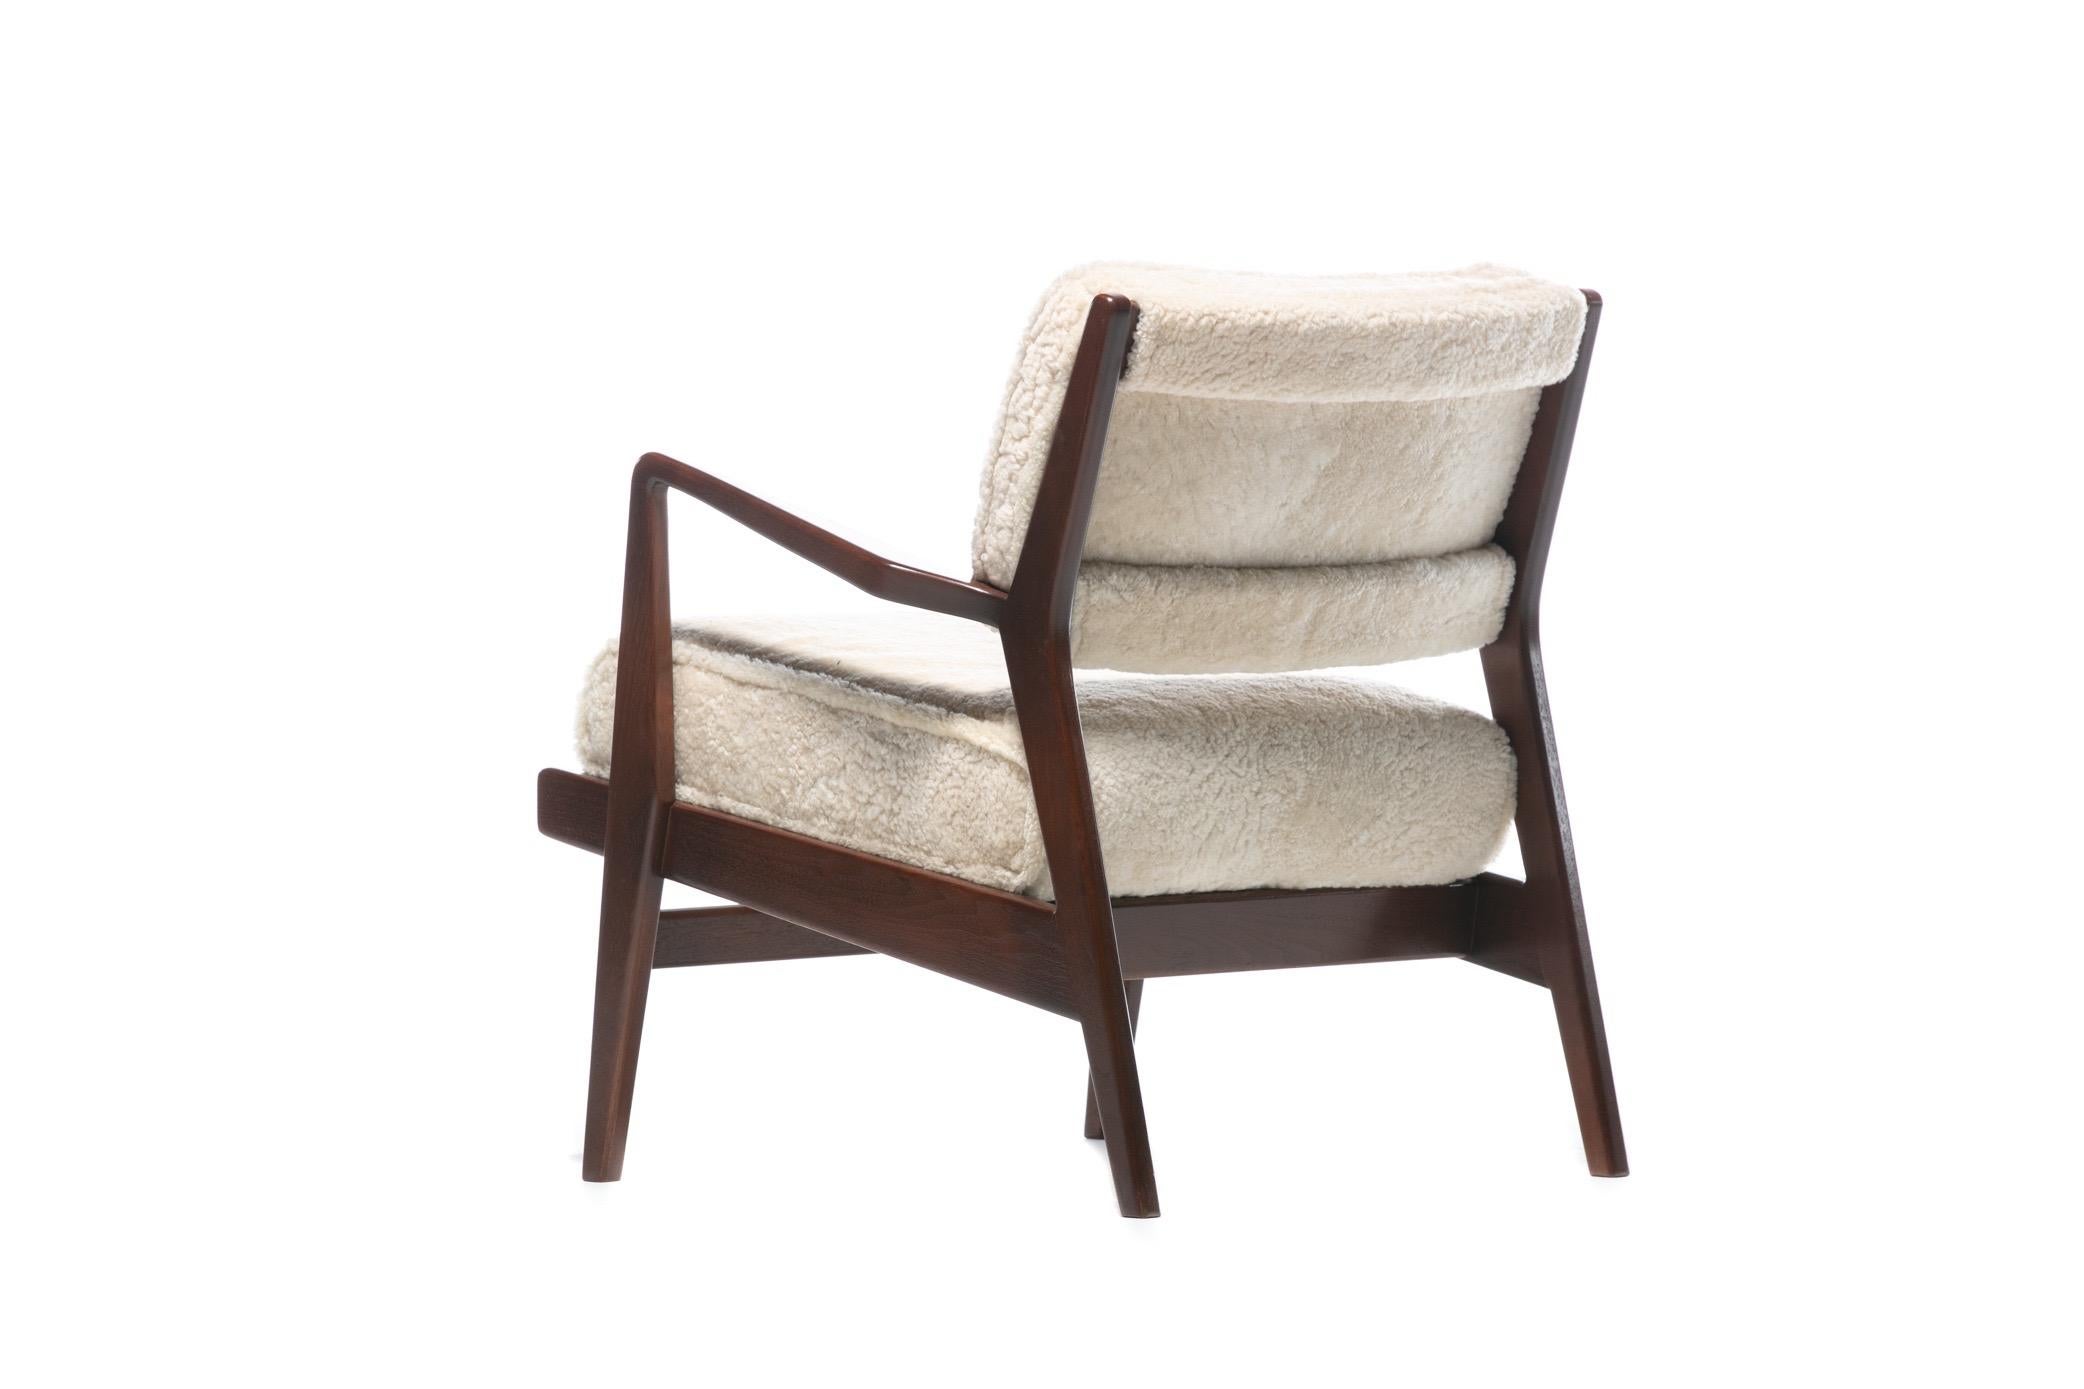 Jens Risom Walnut Lounge Chairs in Ivory Shearling, circa 1950s For Sale 1